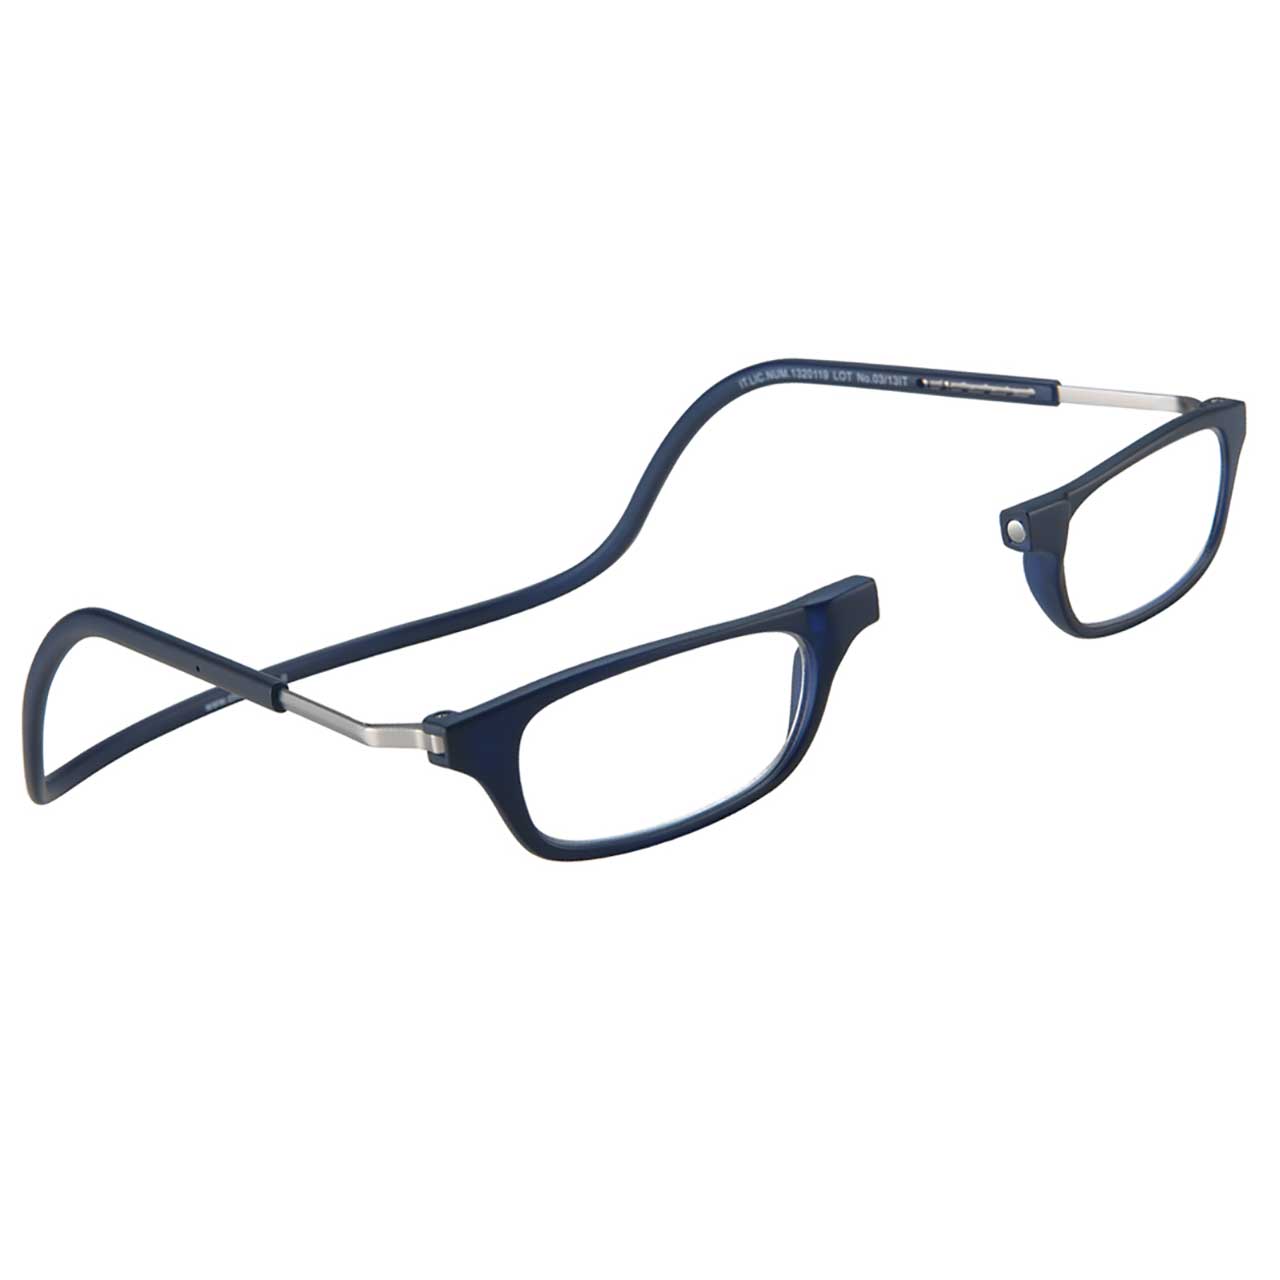 CLIC XL Frosted Magnetlesebrille